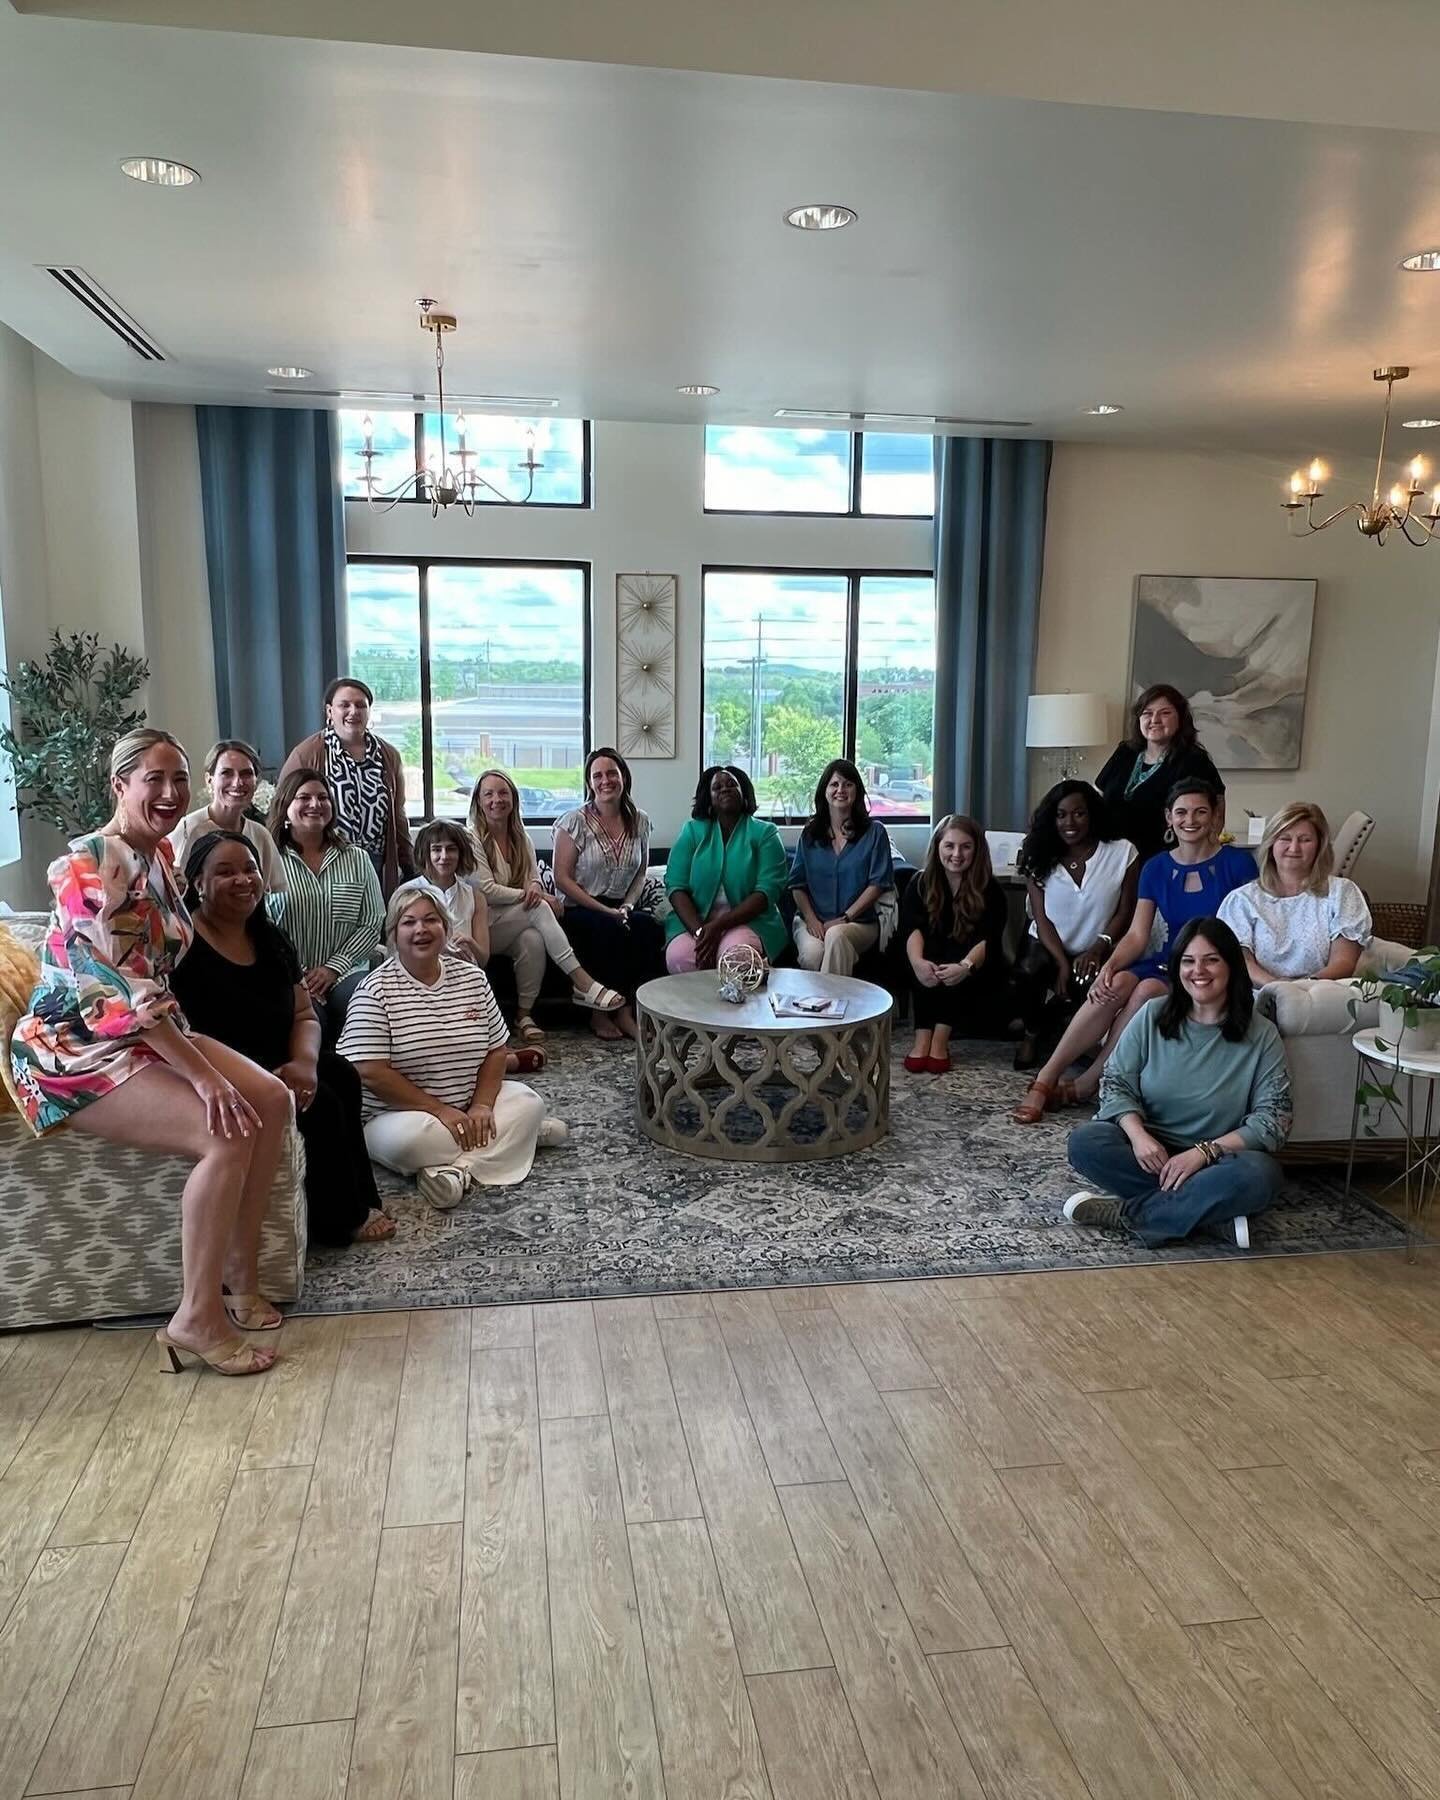 Thinking back to the fantastic workshop experience with @thesapphiresuite! Your insights were a true gem, igniting substantial growth within us. Our time with you was simply invaluable &ndash; thank you for the inspiration! 🌟

#sapphiresuite #inspir